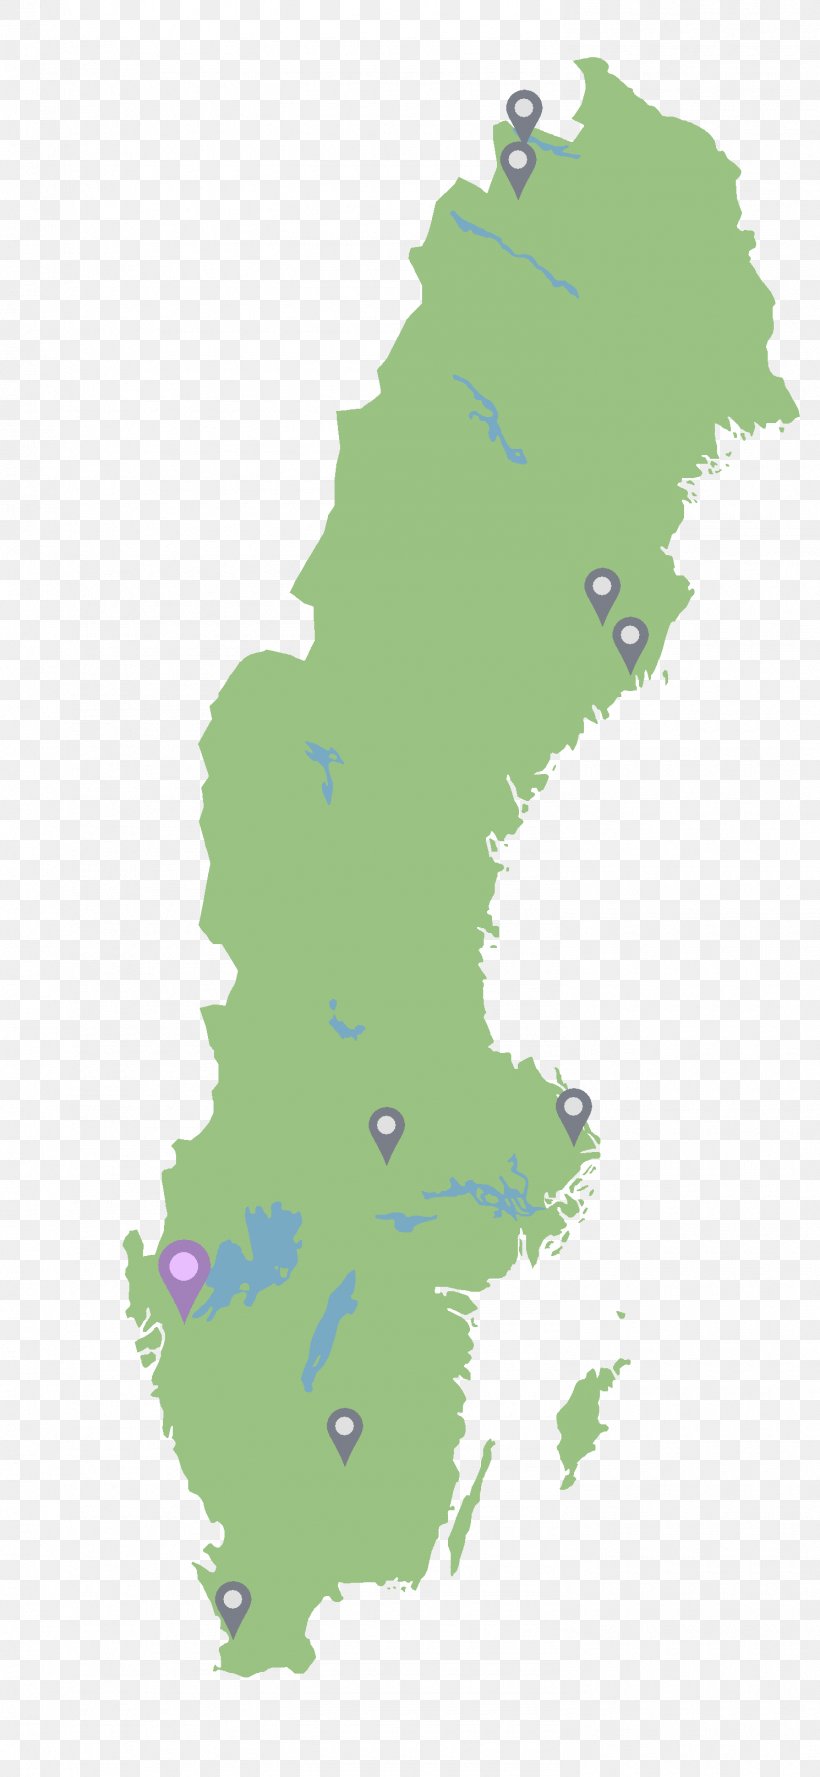 Sweden Vector Graphics Royalty-free Clip Art Illustration, PNG, 1490x3230px, Sweden, Area, Ecoregion, Istock, Map Download Free